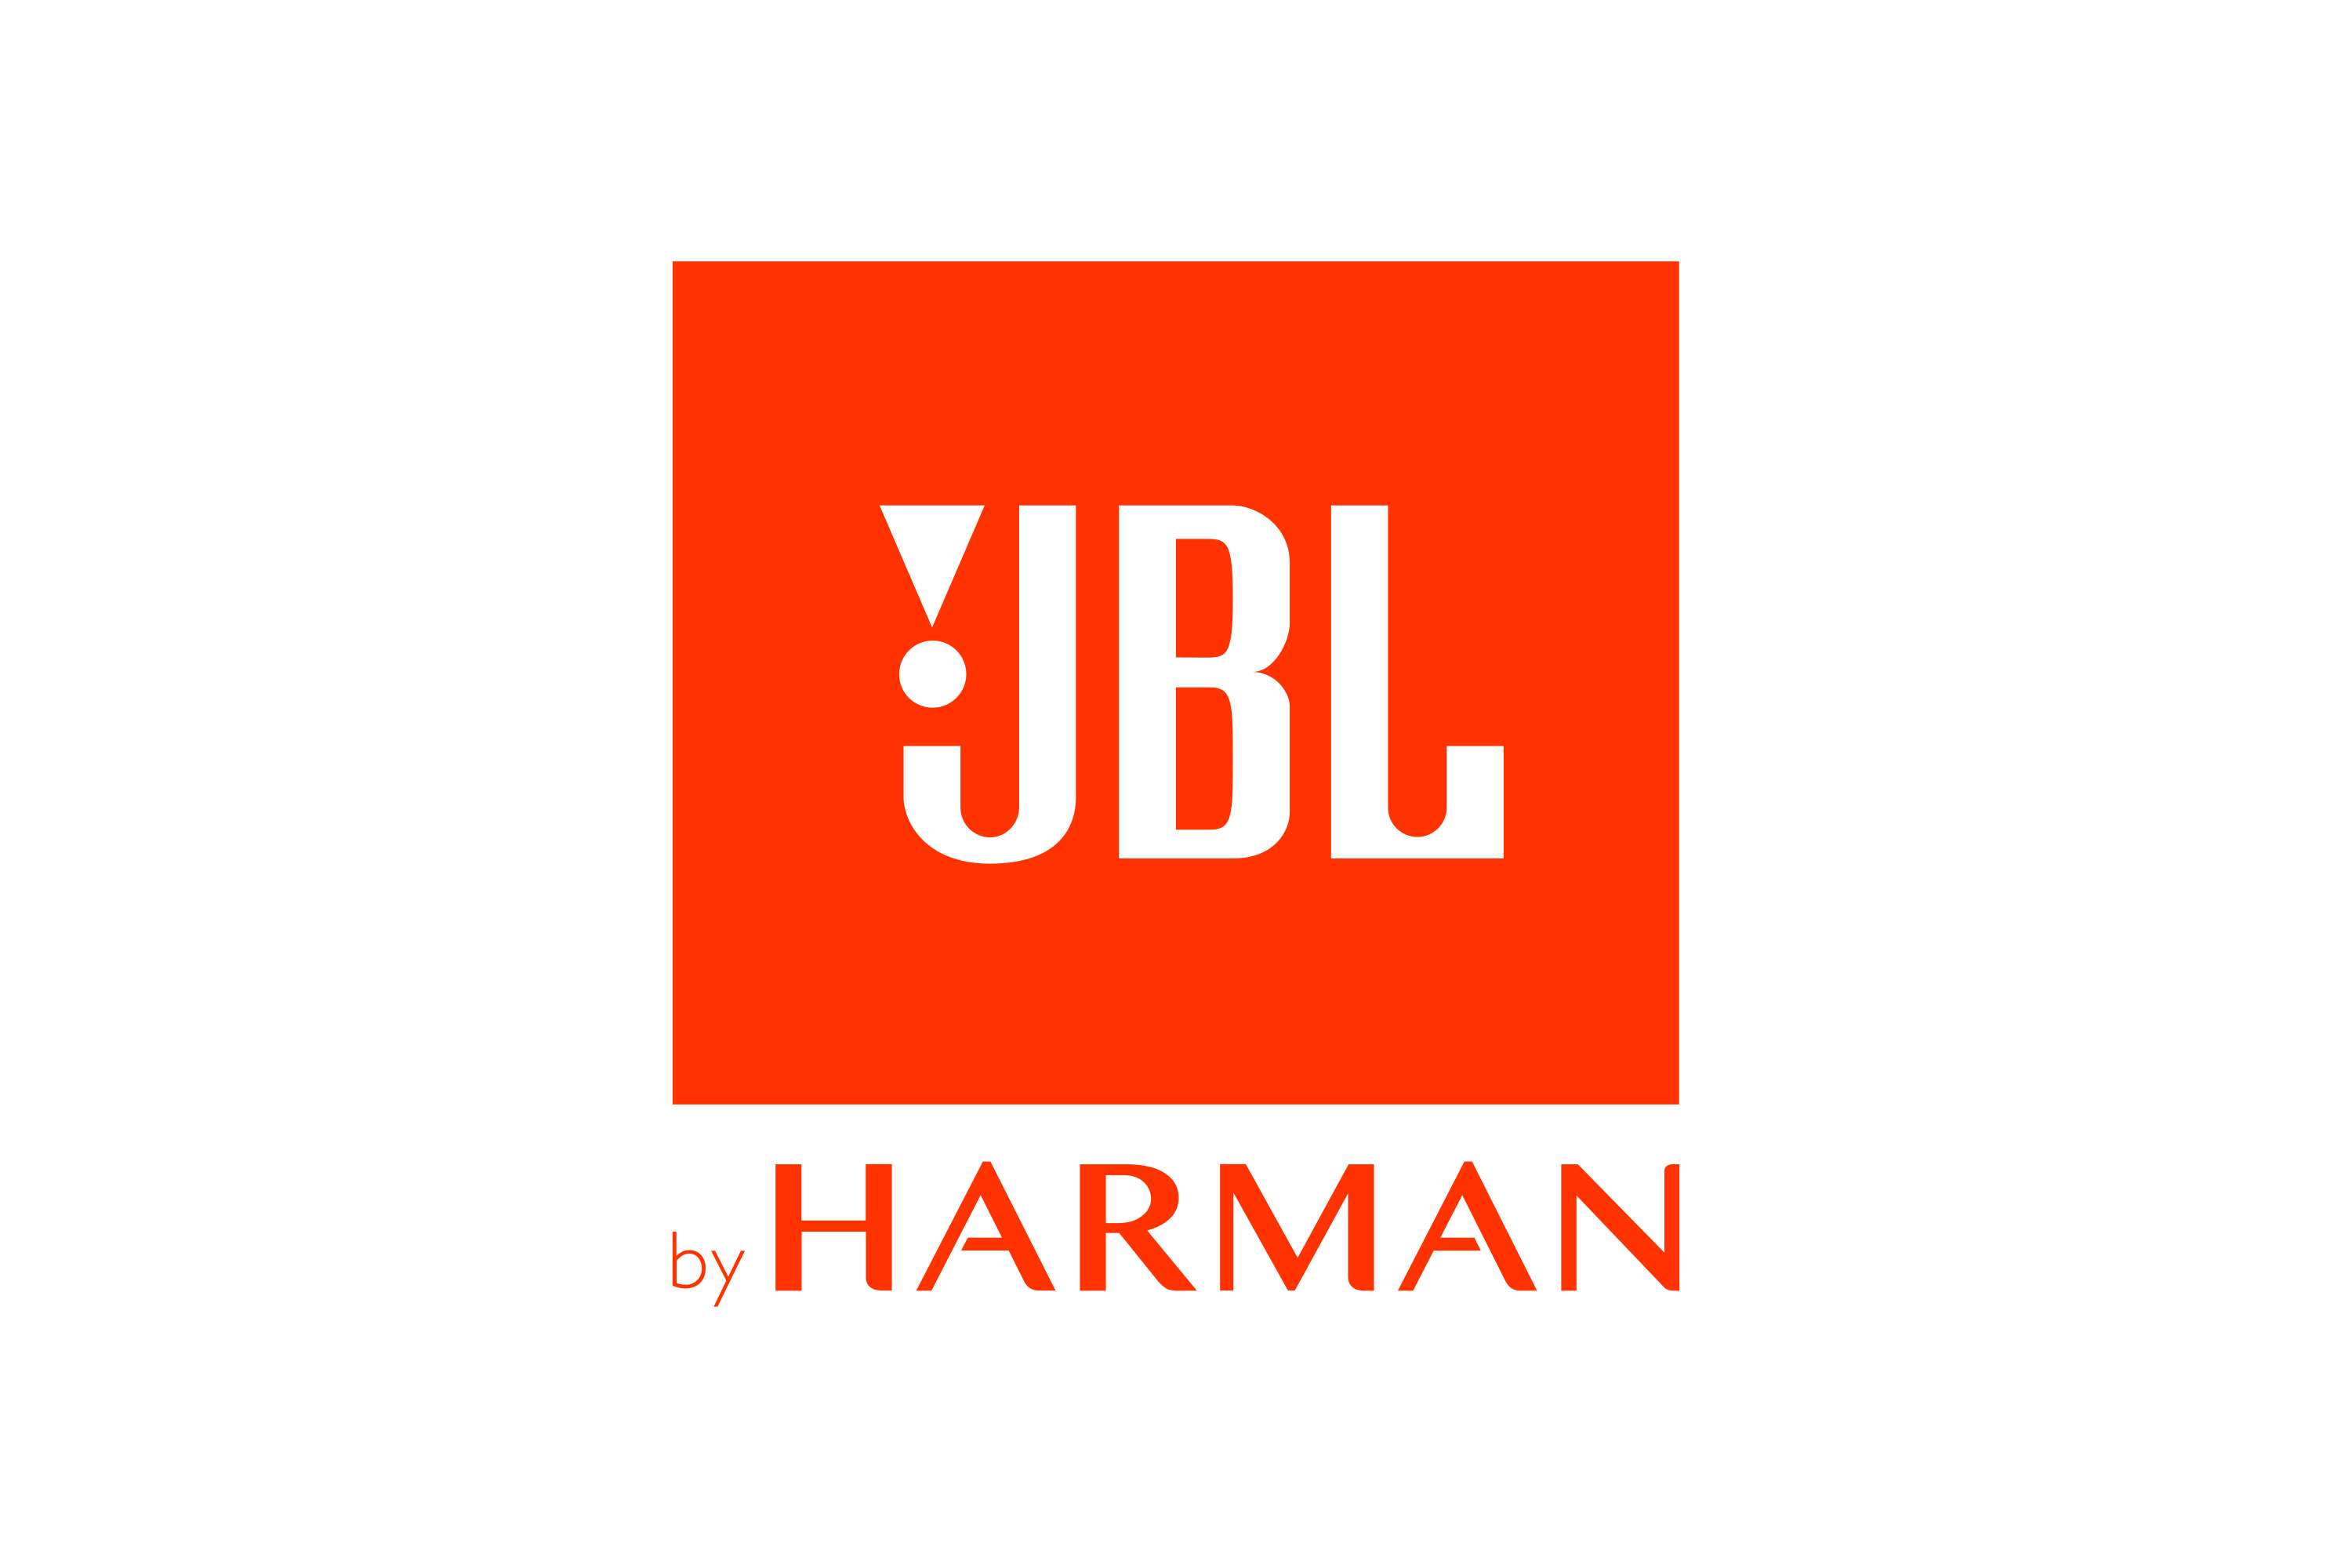 JBL Launches 3D Anamorphic Advertising Campaign